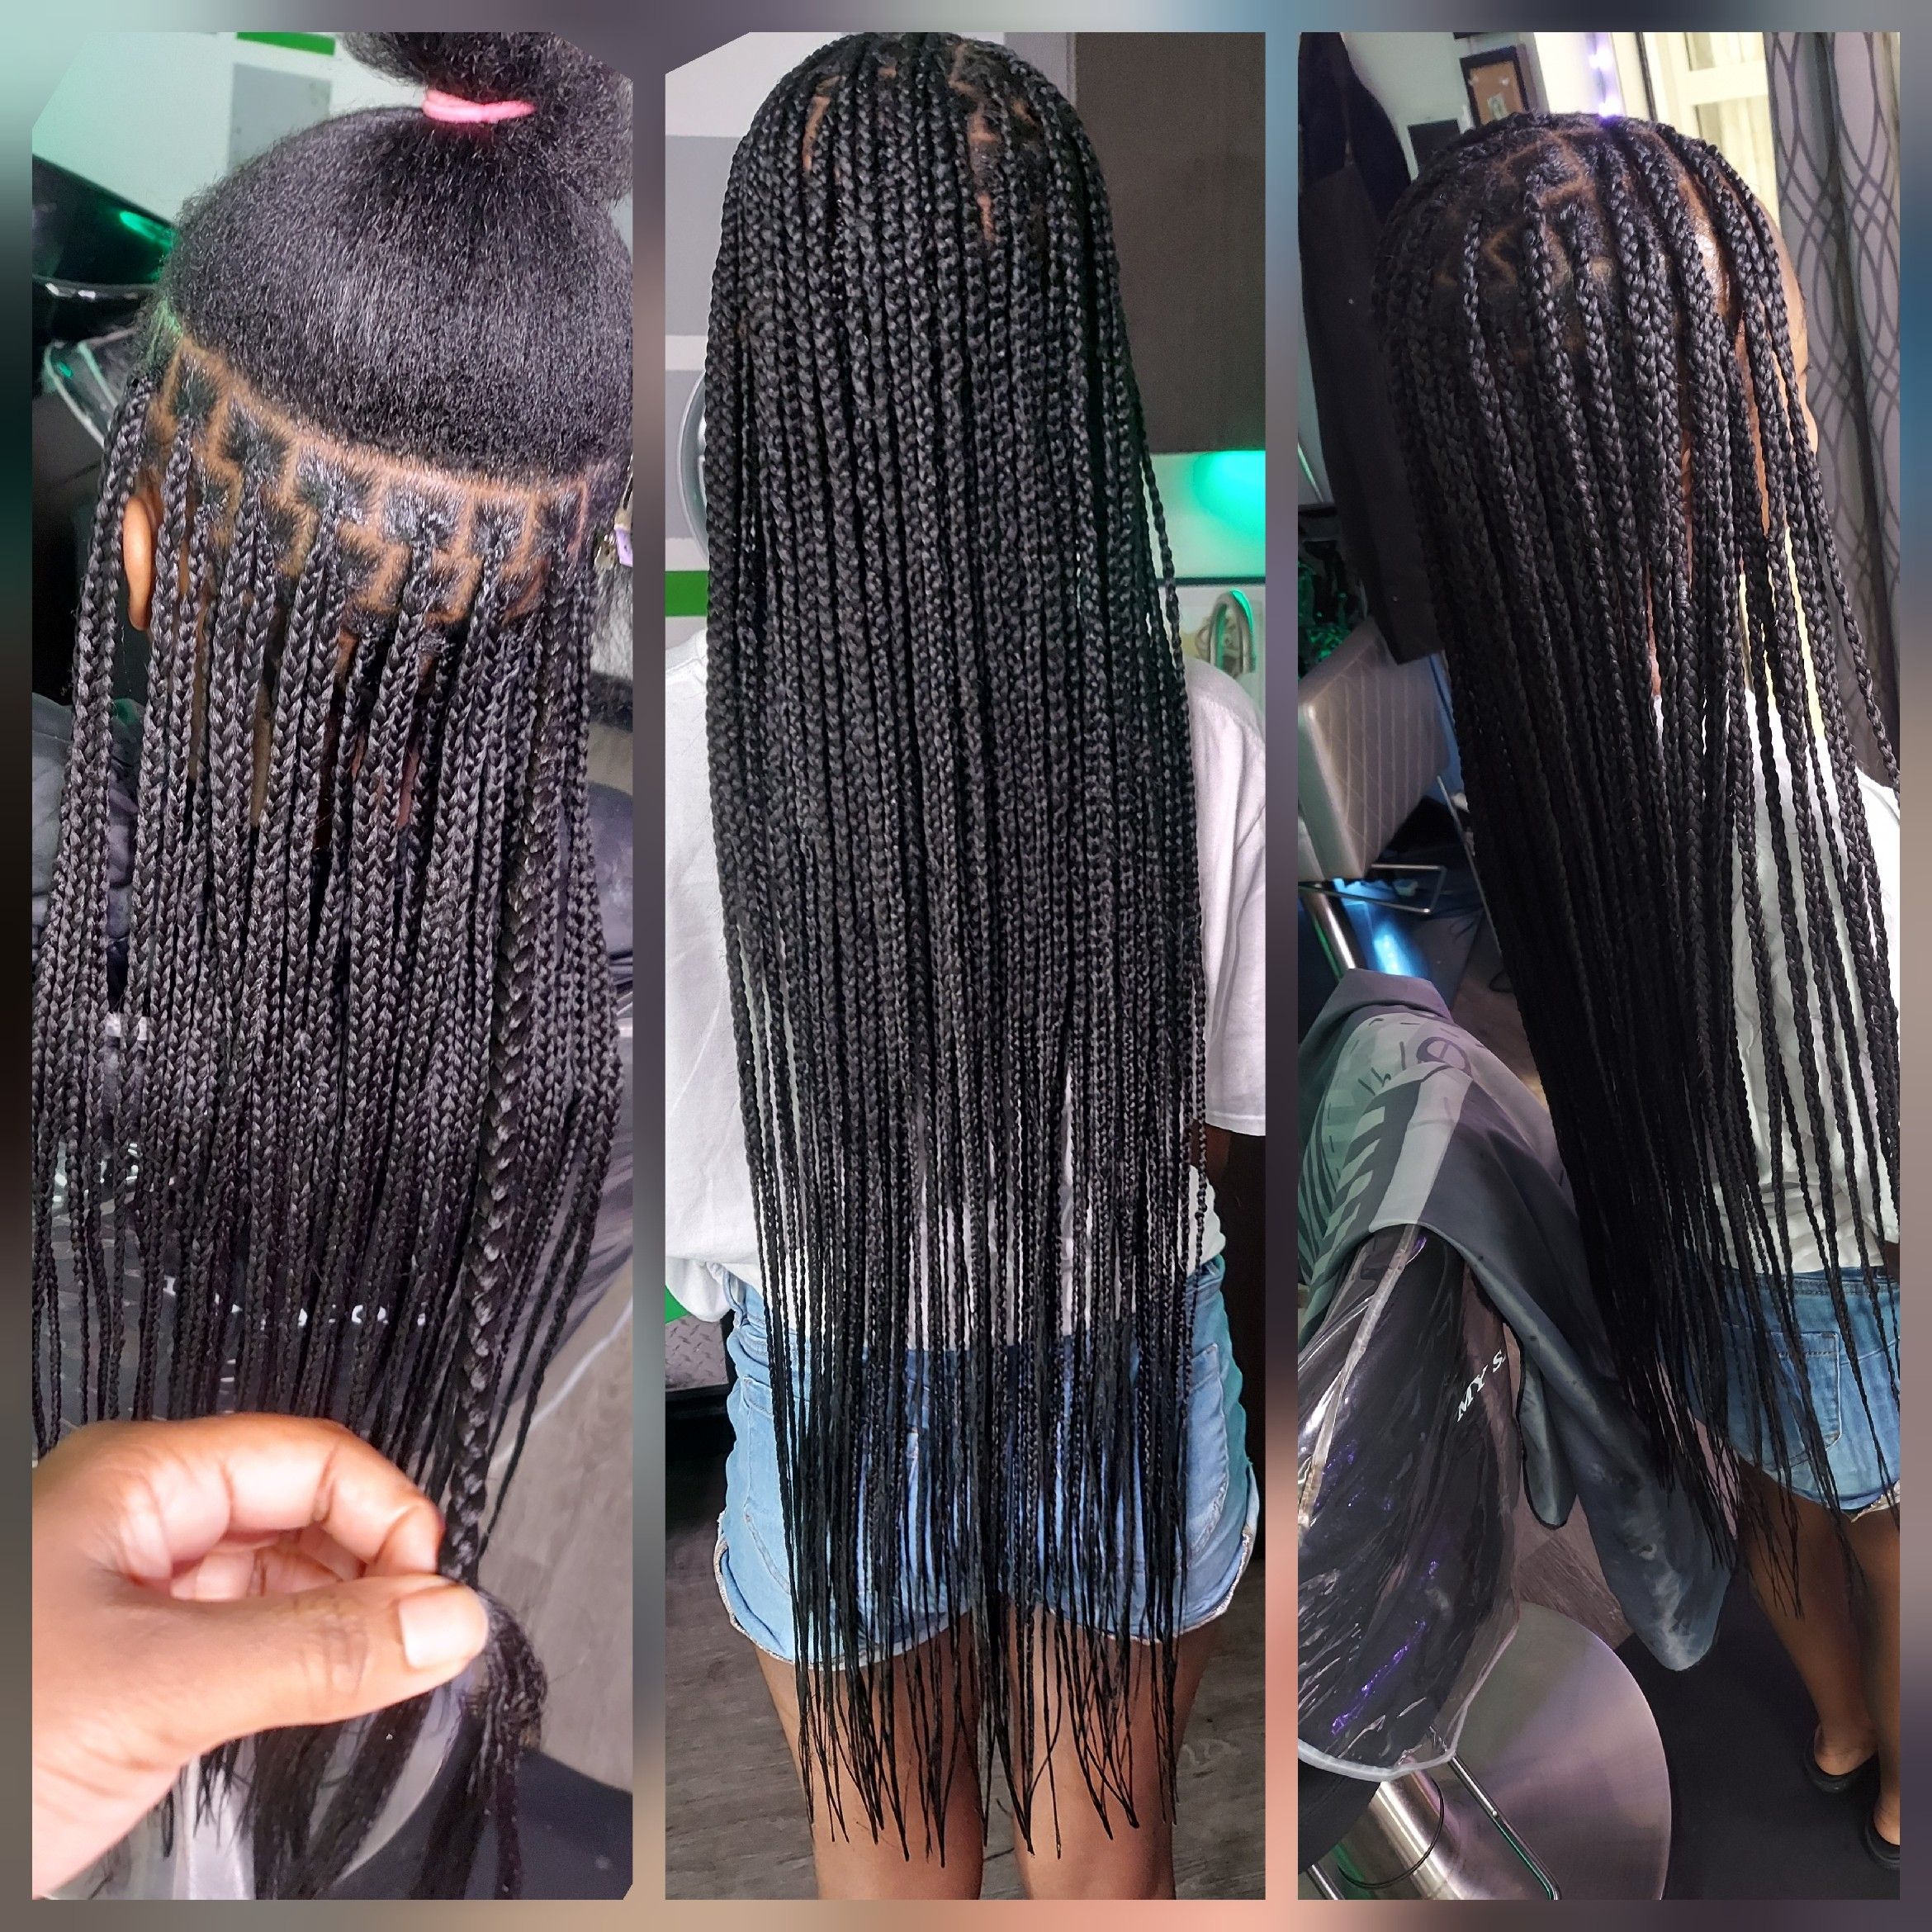 Knotless Braids/Individuals (hair not included) portfolio